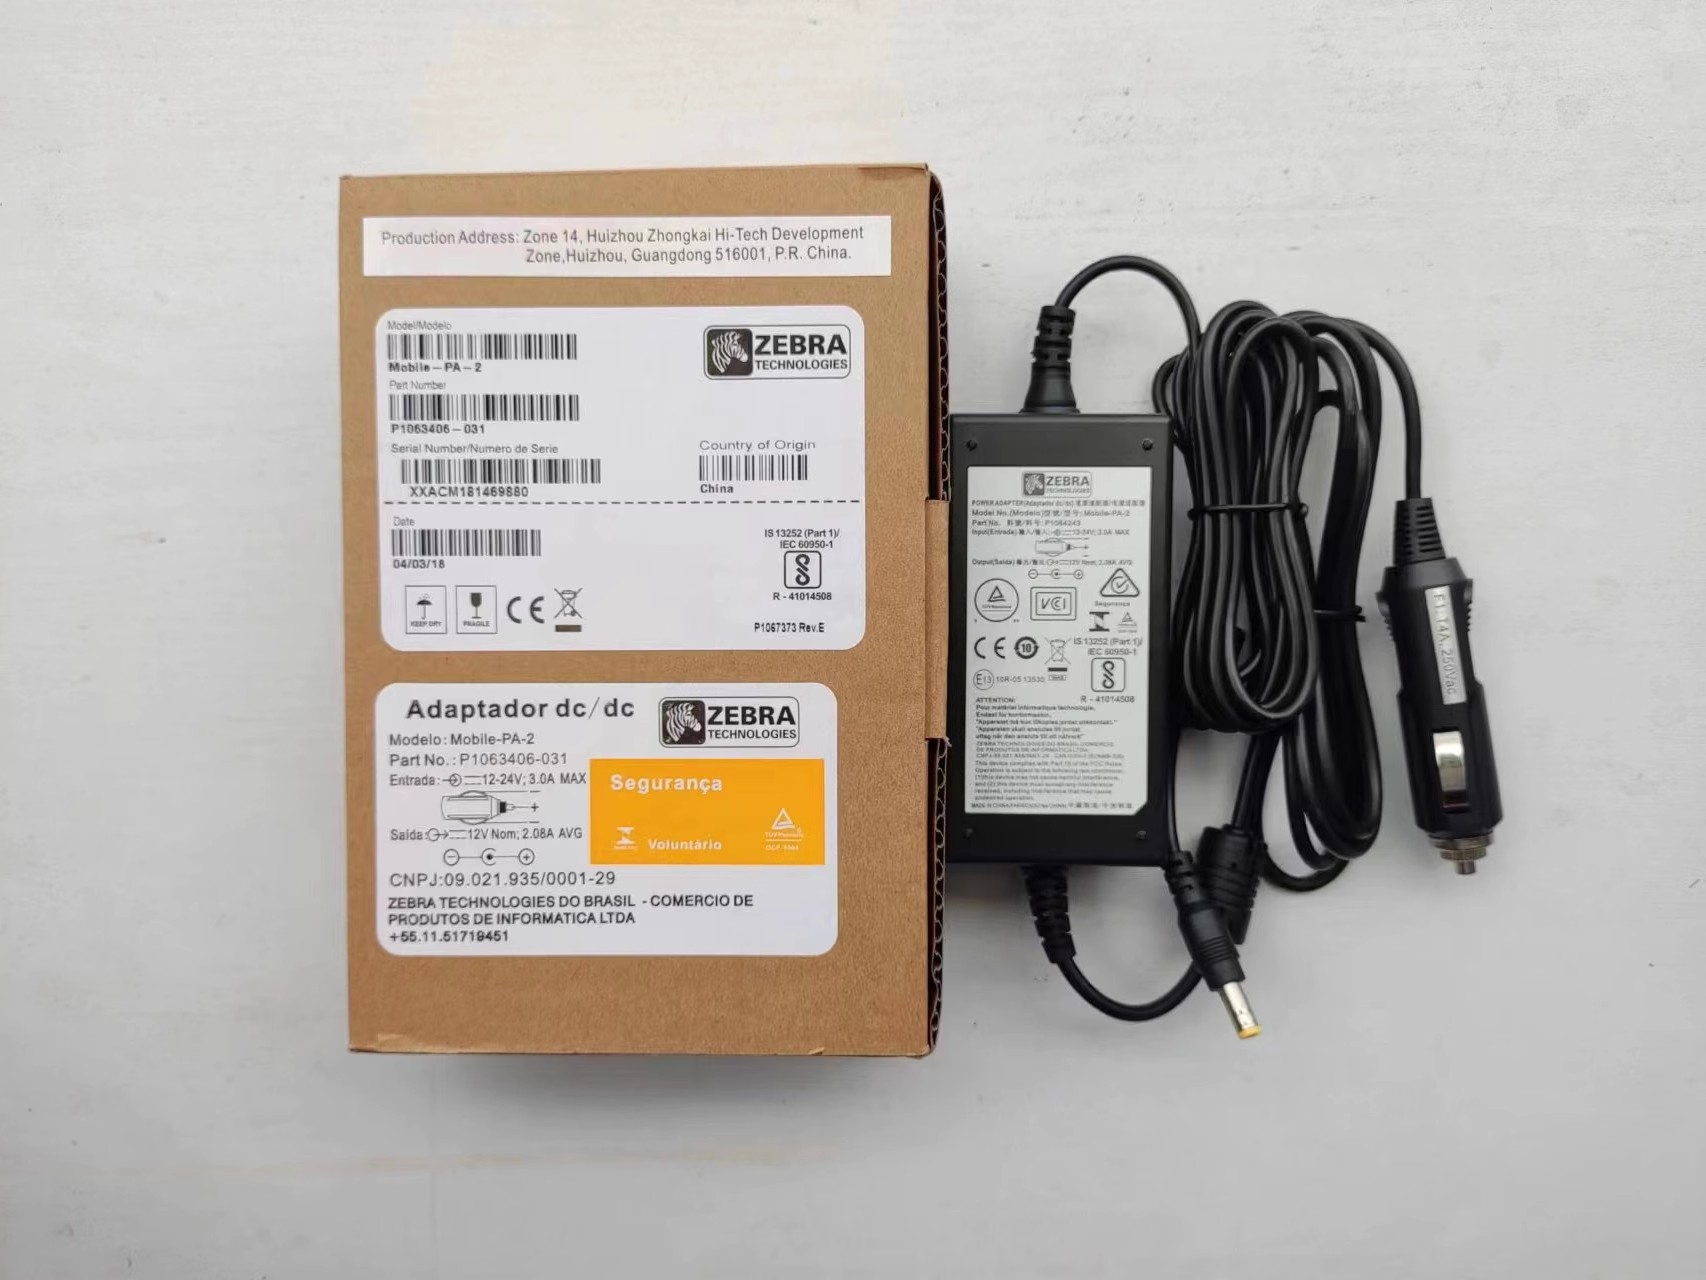 *Brand NEW*12-24V 3.0A MAX 12V 2.08A AC/DC AC ADAPTER ZEBRA P1064243 M0biIe-PA-2 POWER Supply - Click Image to Close